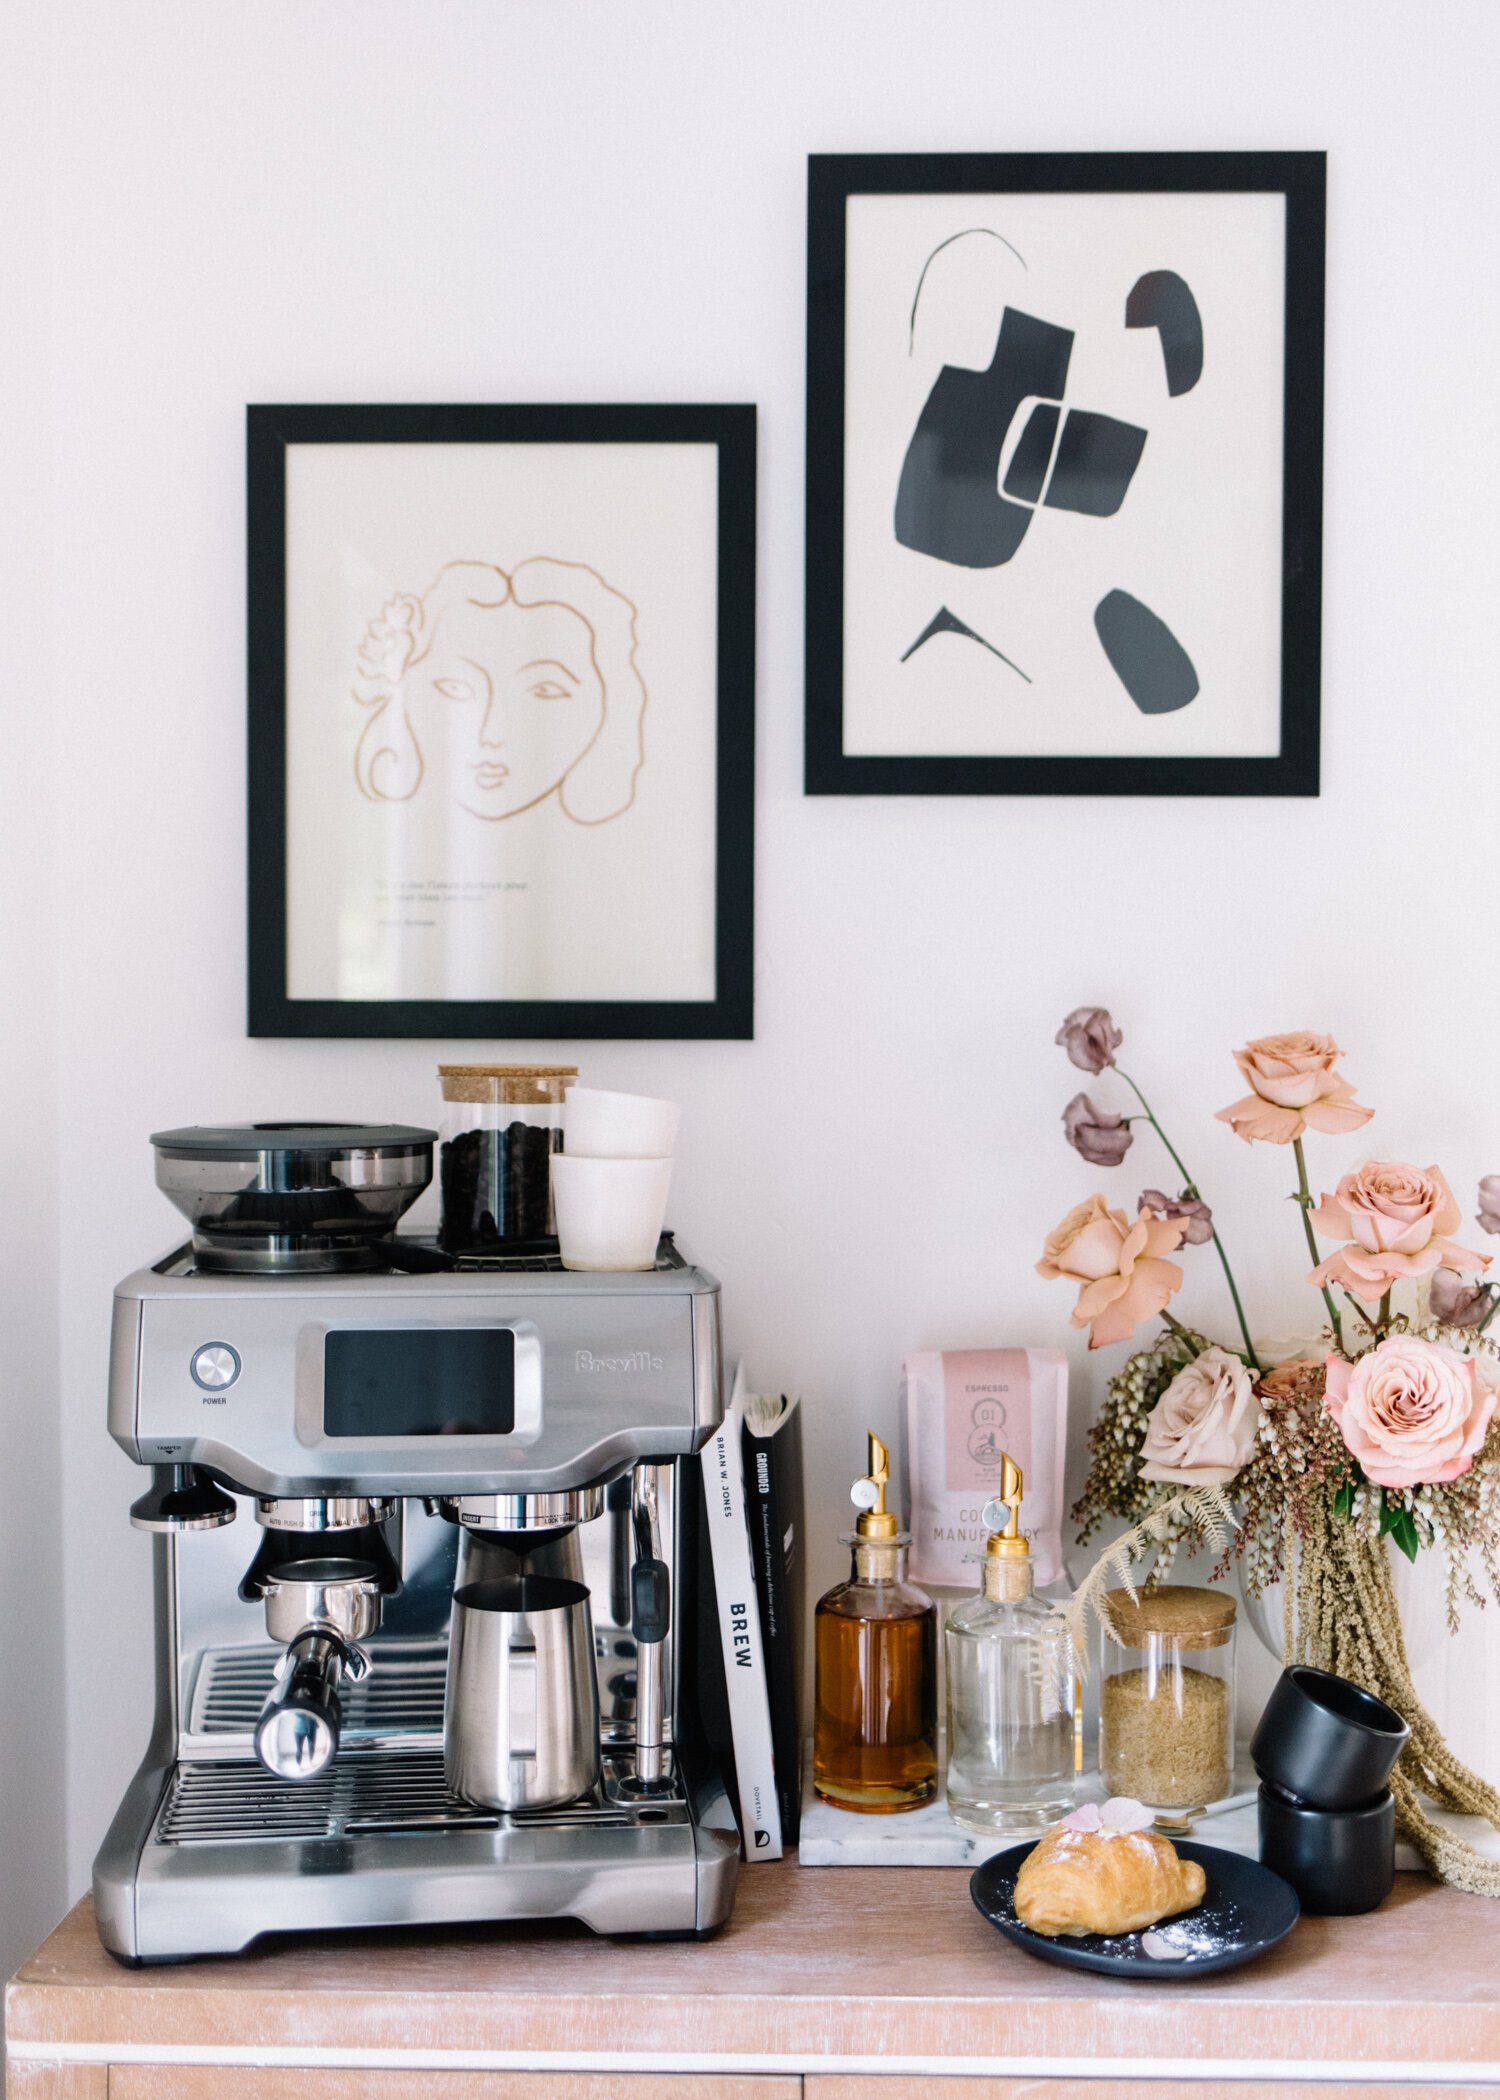 Sleek Coffee Makers for Decorating Your Home - Related Rentals Blog